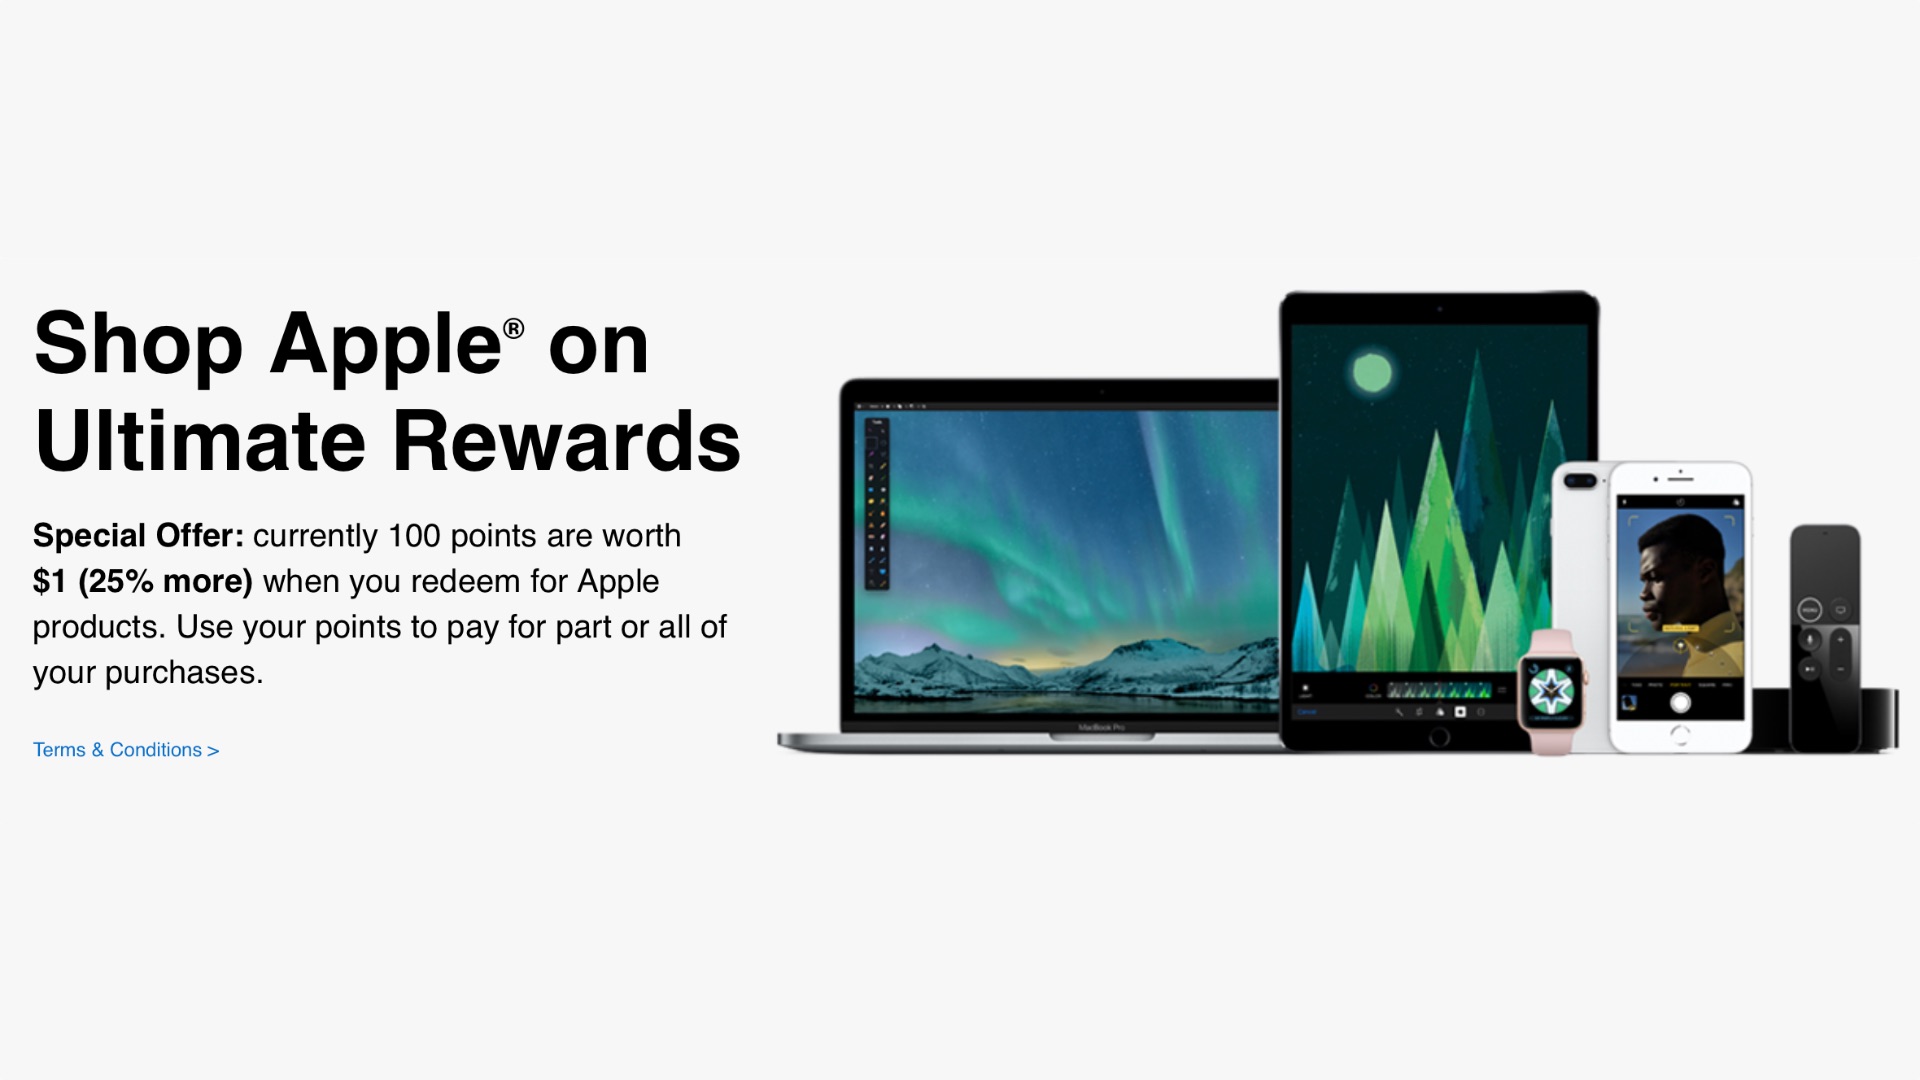 Chase launches Apple Ultimate Rewards Store for buying products